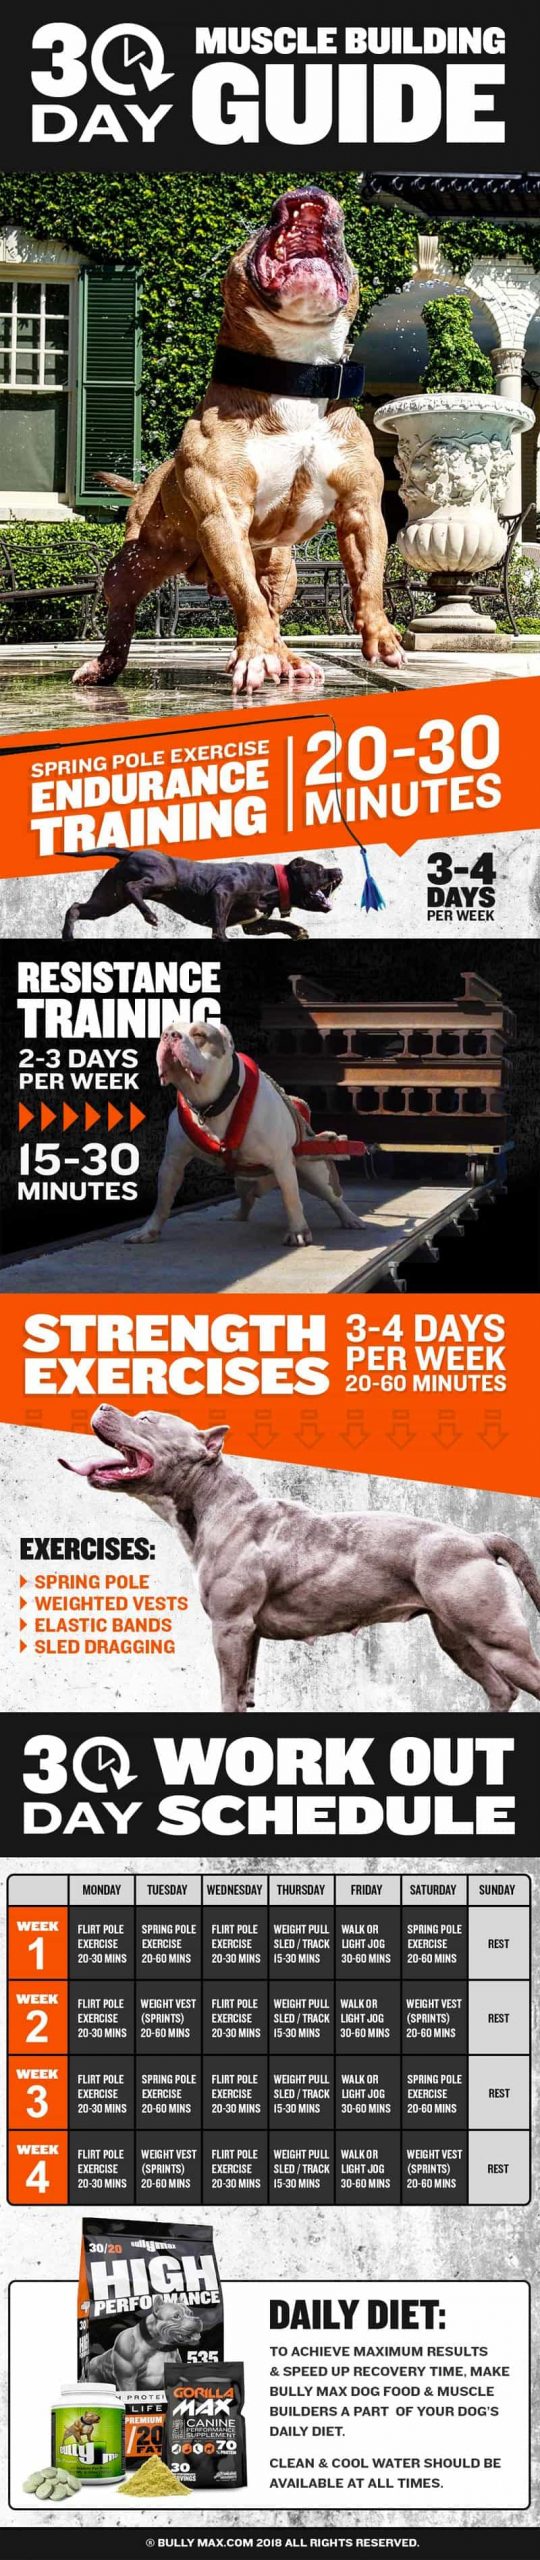 Muscle Building Workout Guide for Dogs